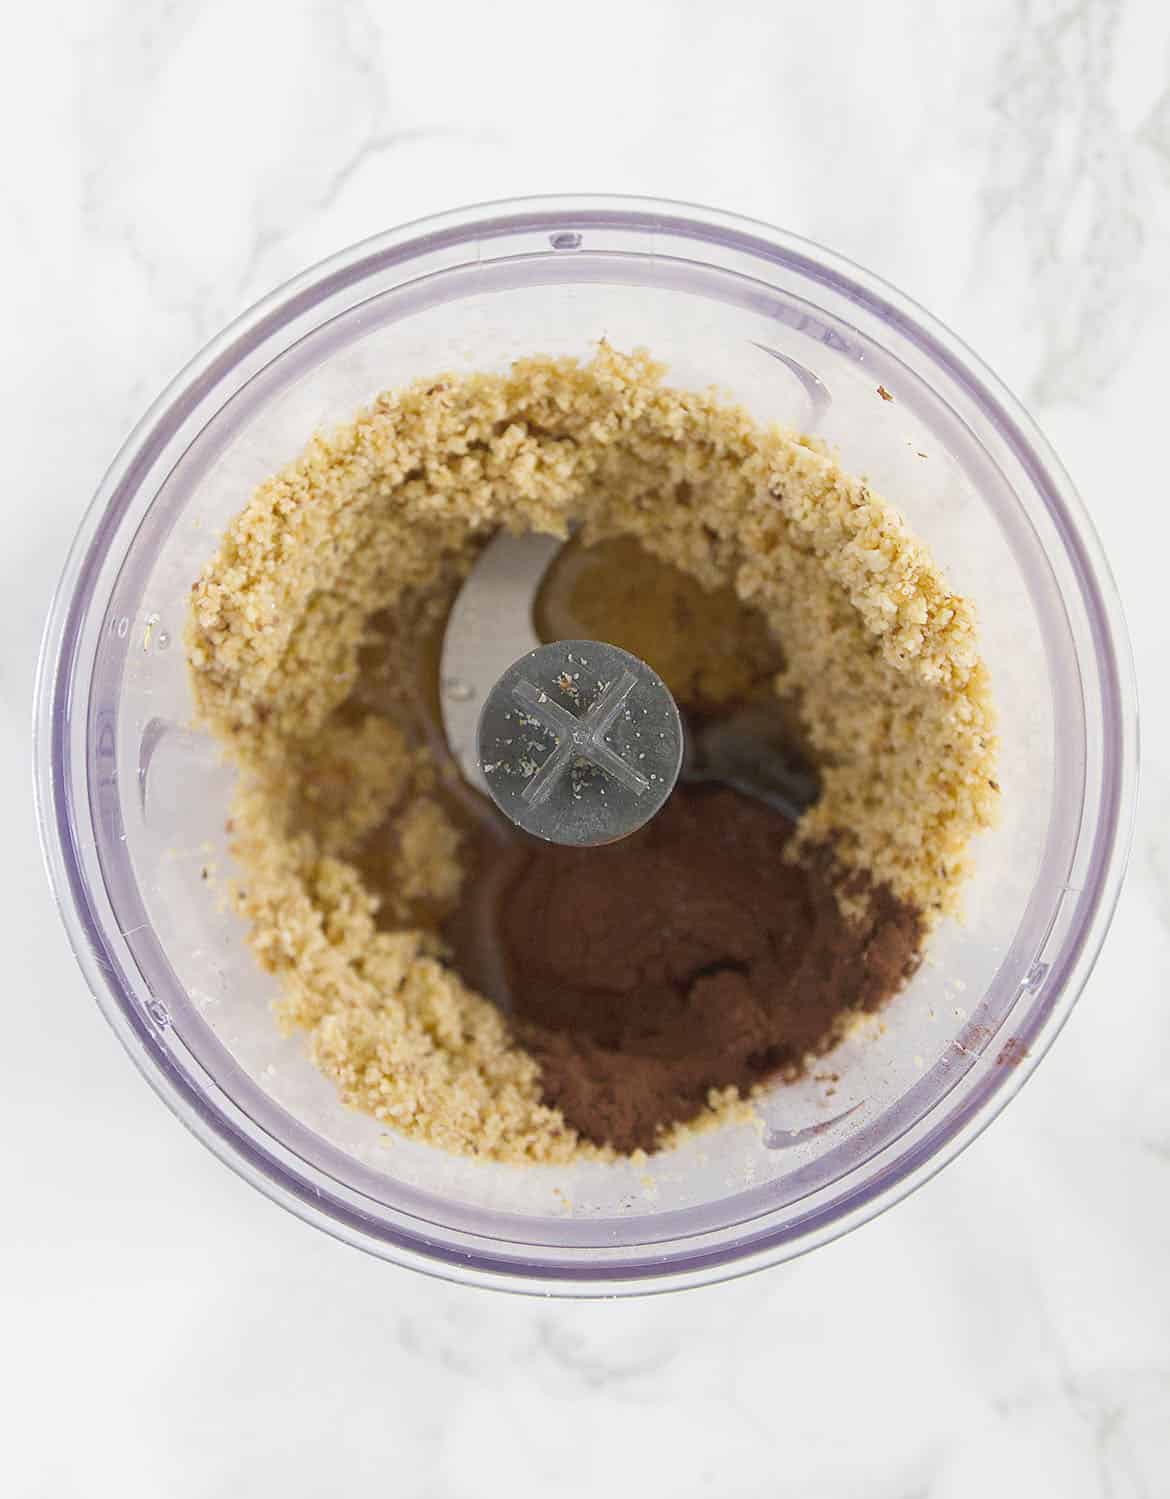 Top view of a small food processor with ground hazelnuts and cocoa powder.